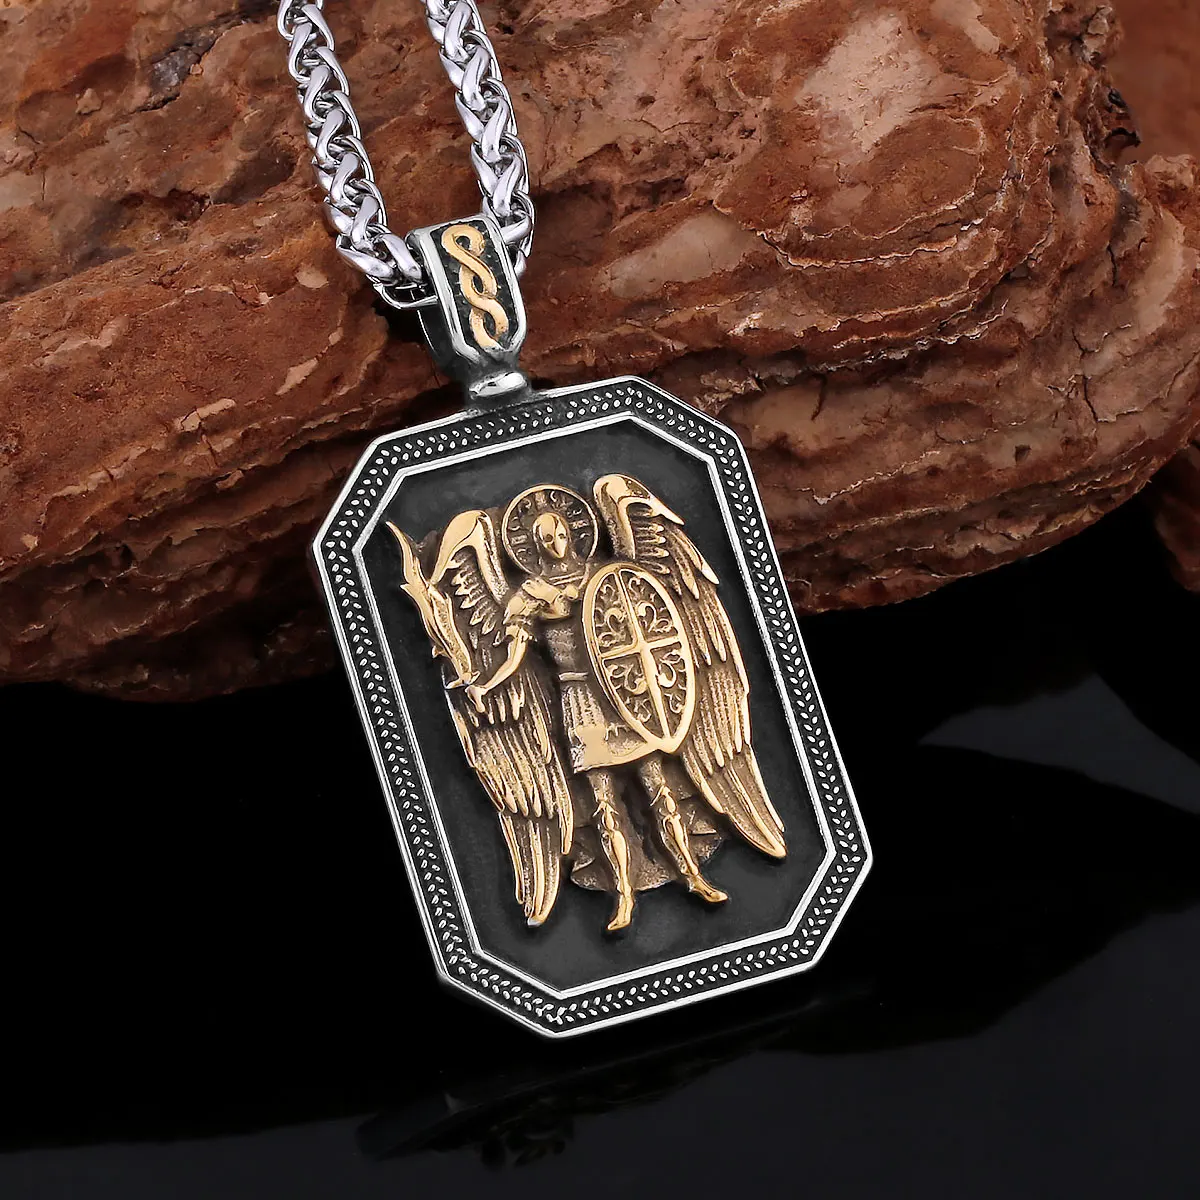 

New Creative Egyptian Pharaoh Viking Necklace Retro Nordic Men's Amulet Stainless Steel Pendant Party Jewelry Teen Gift Bag